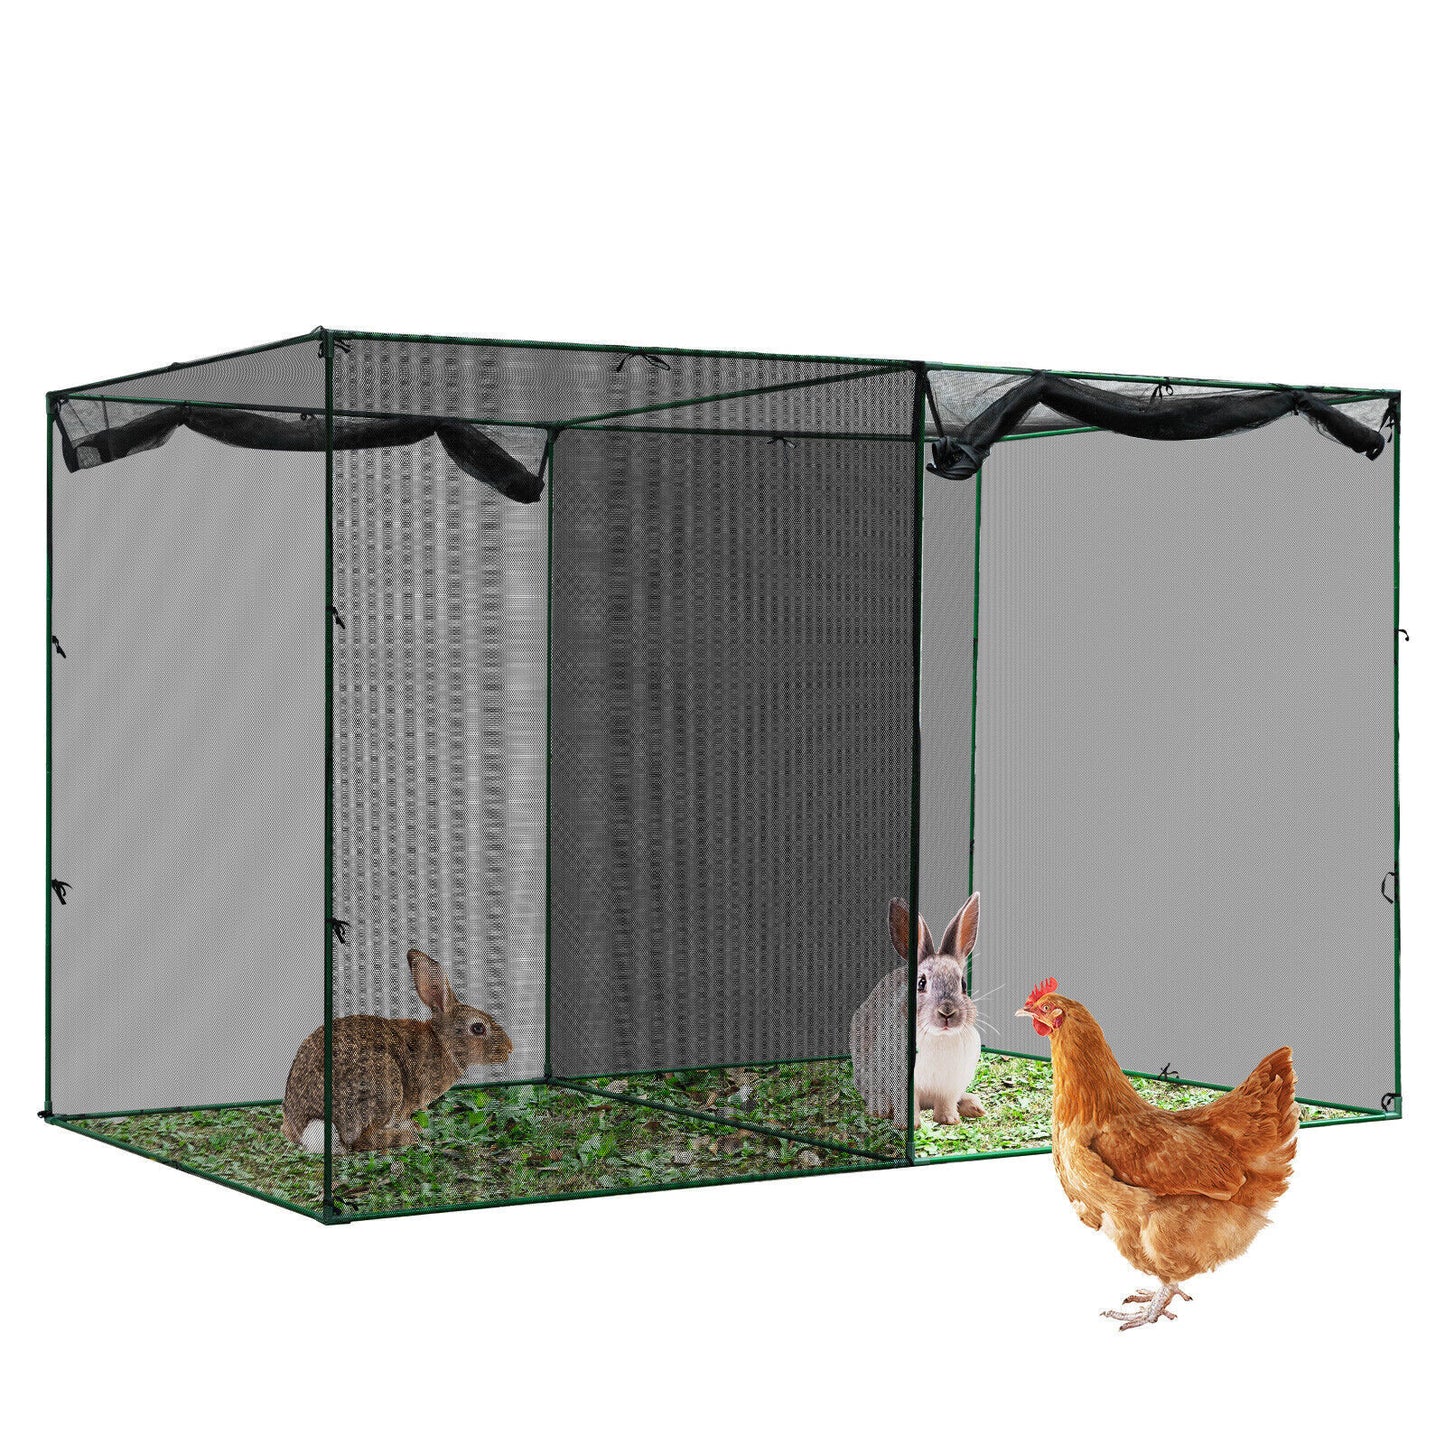 6.5 x 10 Feet Crop Cage Plant Protection Tent for Insects, Squirrel etc w/ Bag